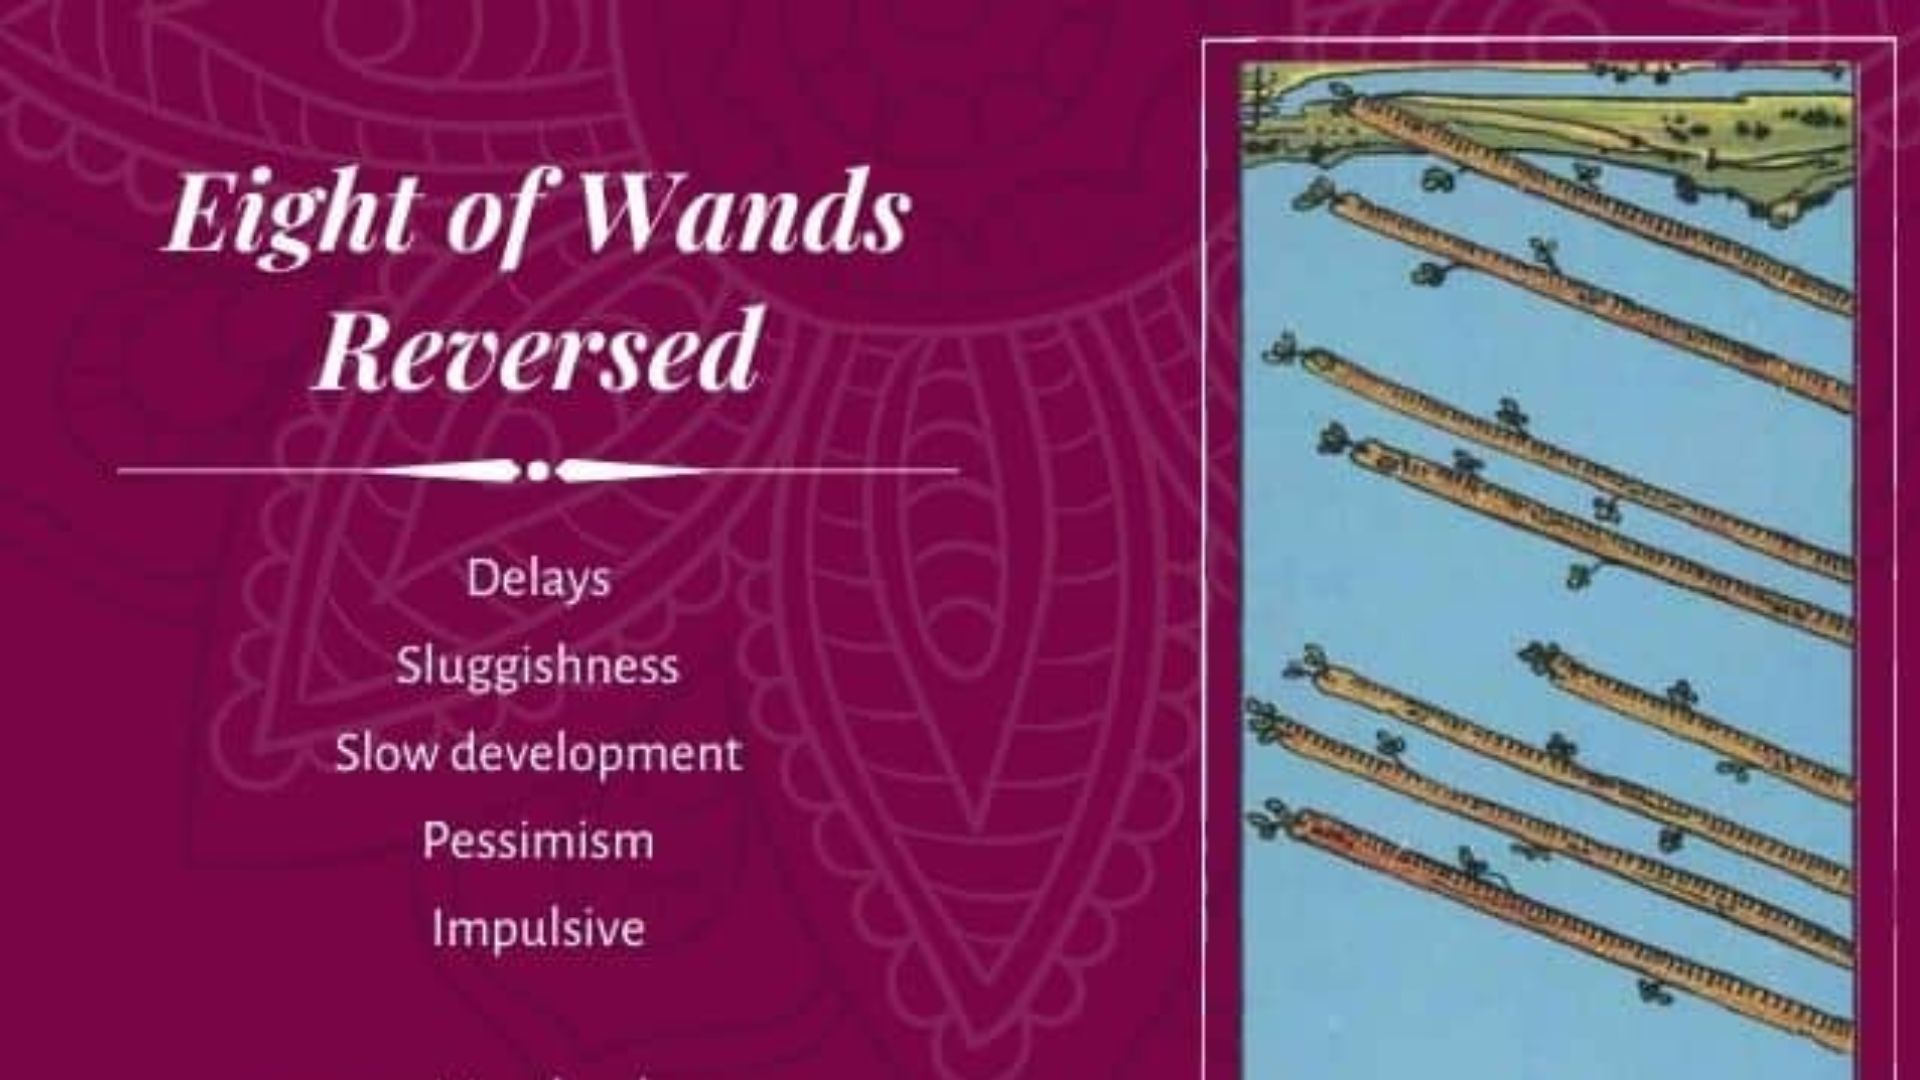 8 Of Wands Card Reversed